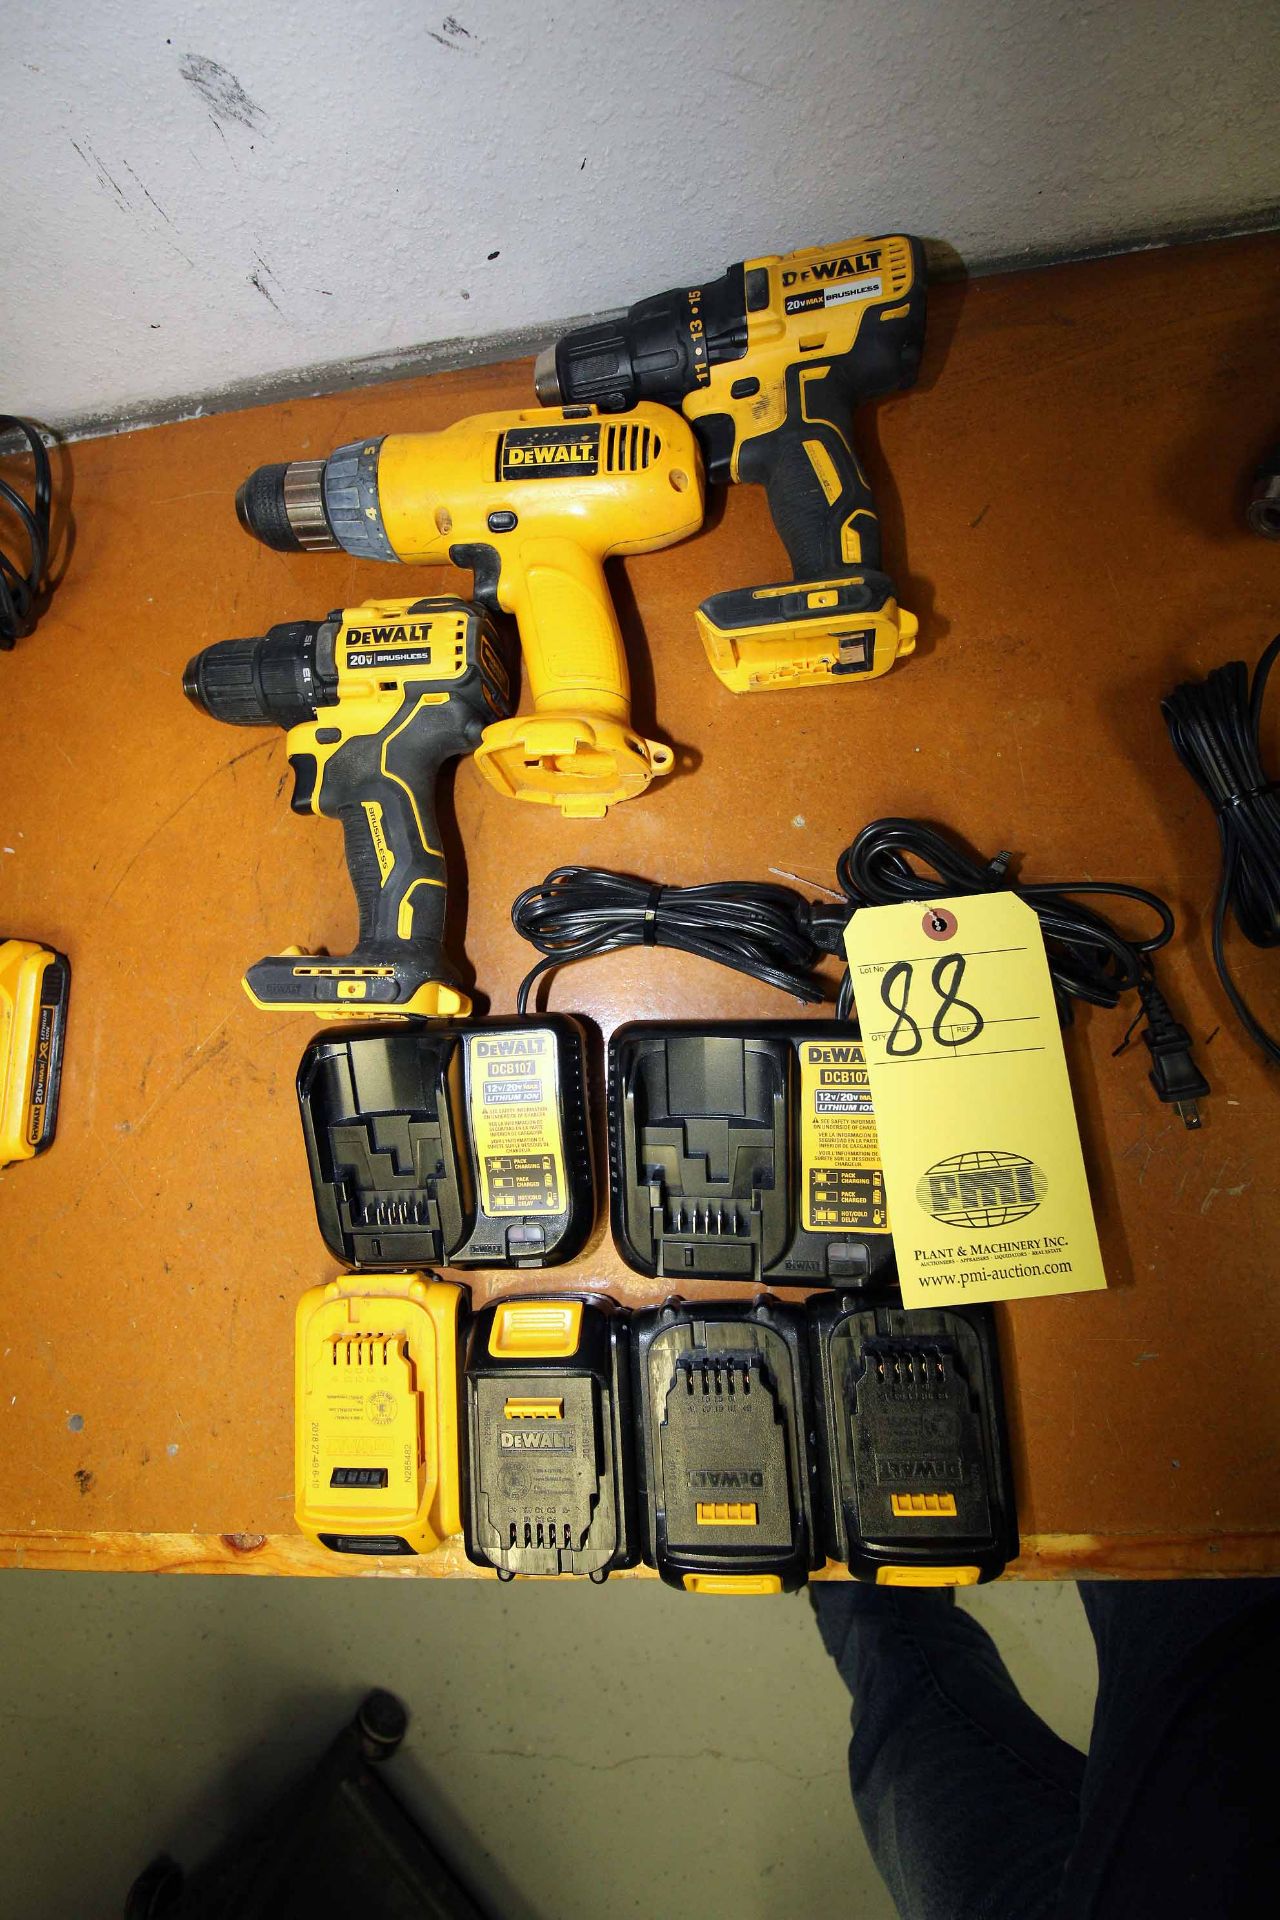 LOT CONSISTING OF: (3) Dewalt battery operated drills, (2) DCB107 chargers (4) 20 v. Lithium